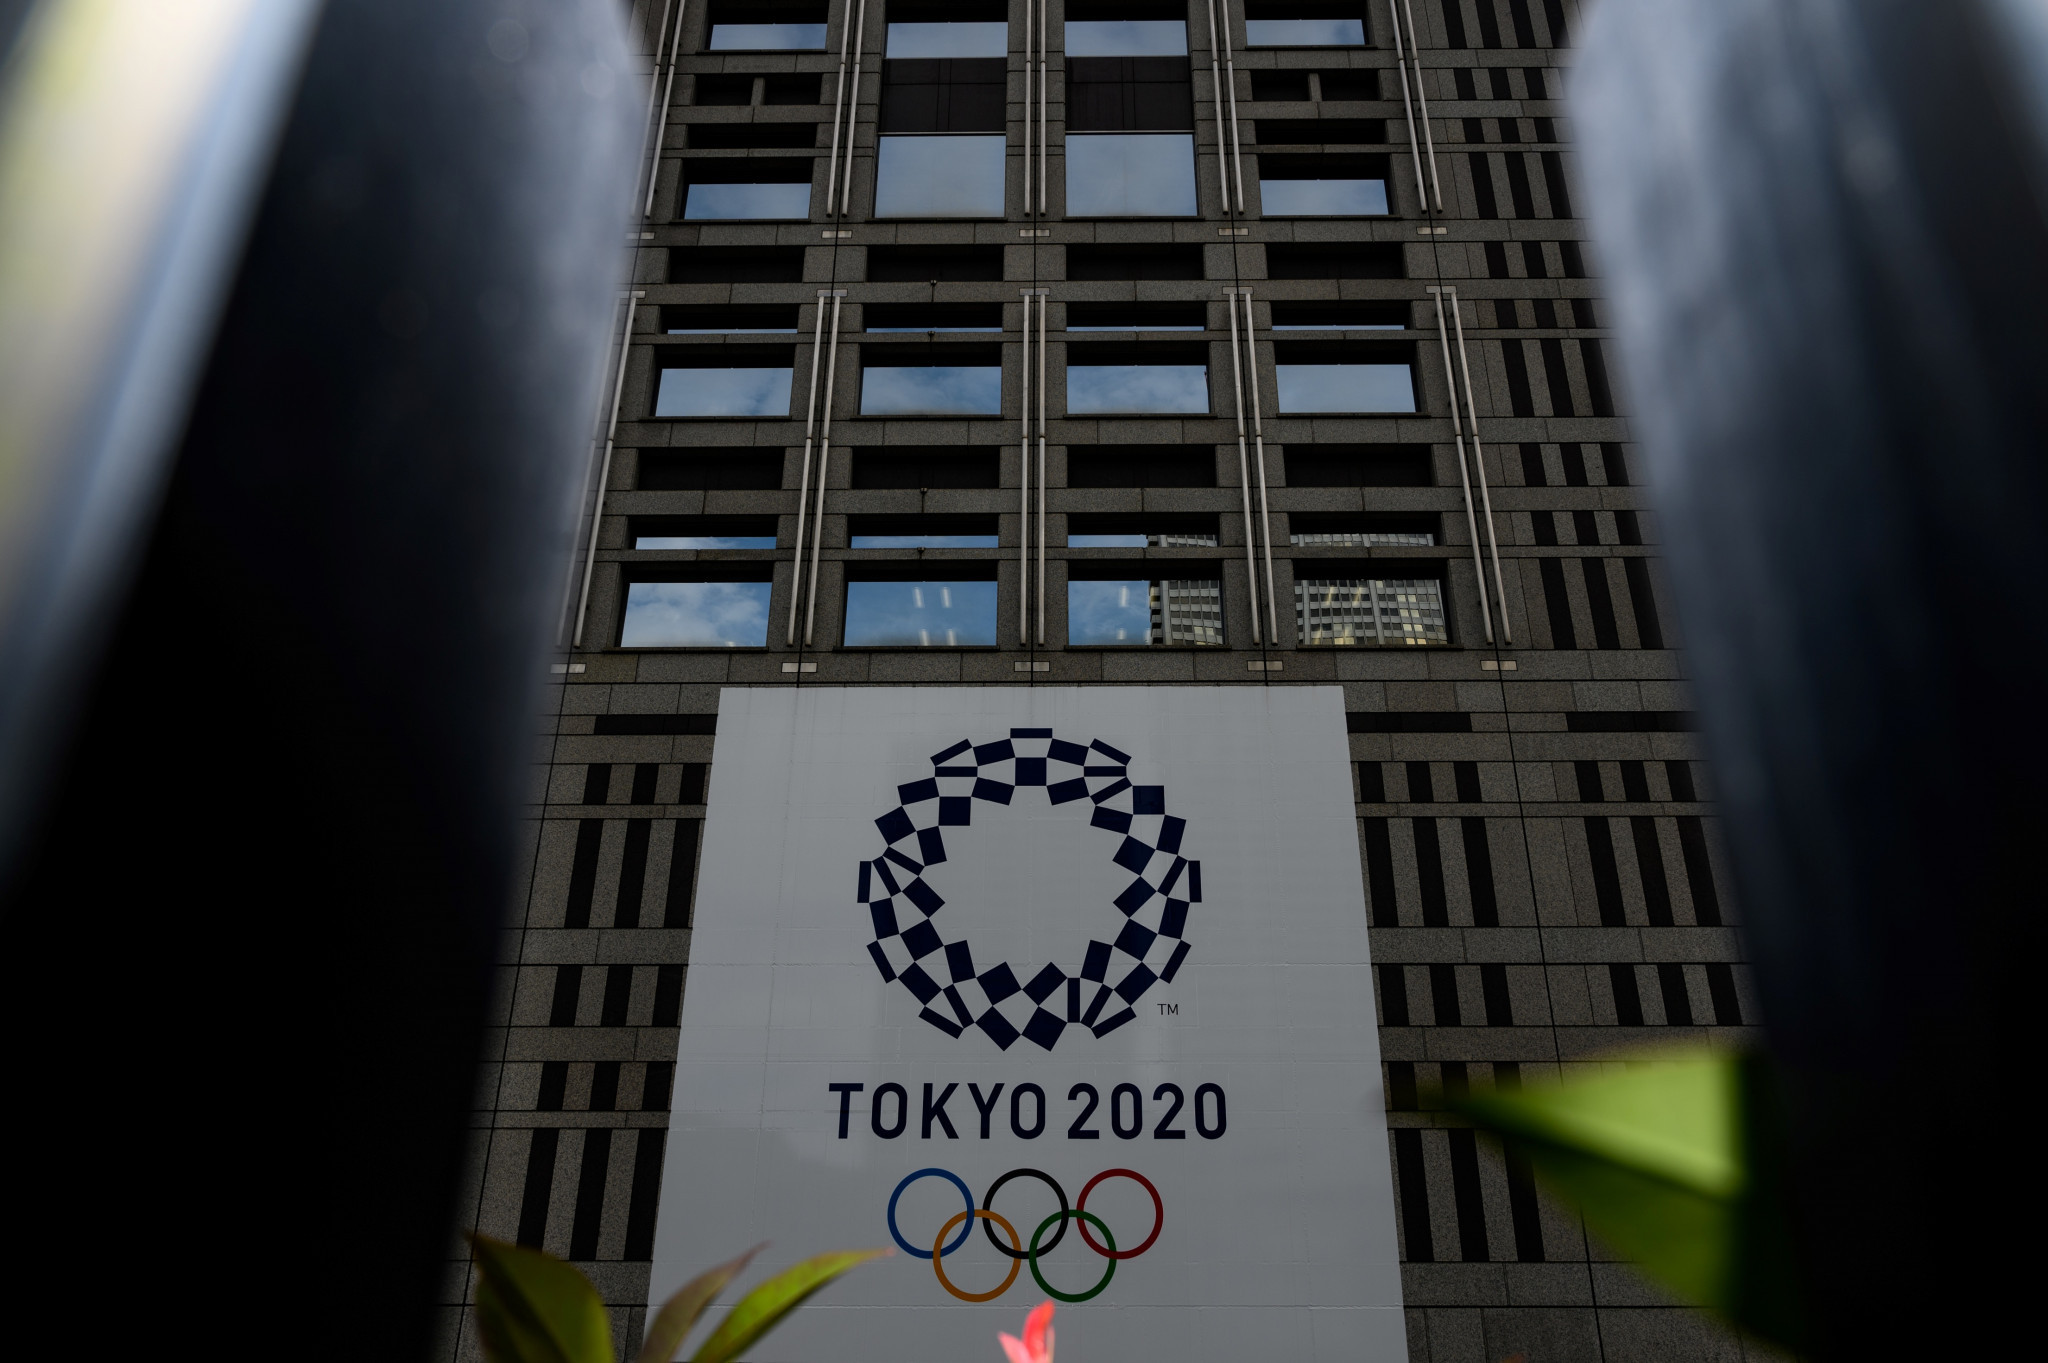 Fifth Tokyo 2020 staff member tests positive for COVID-19